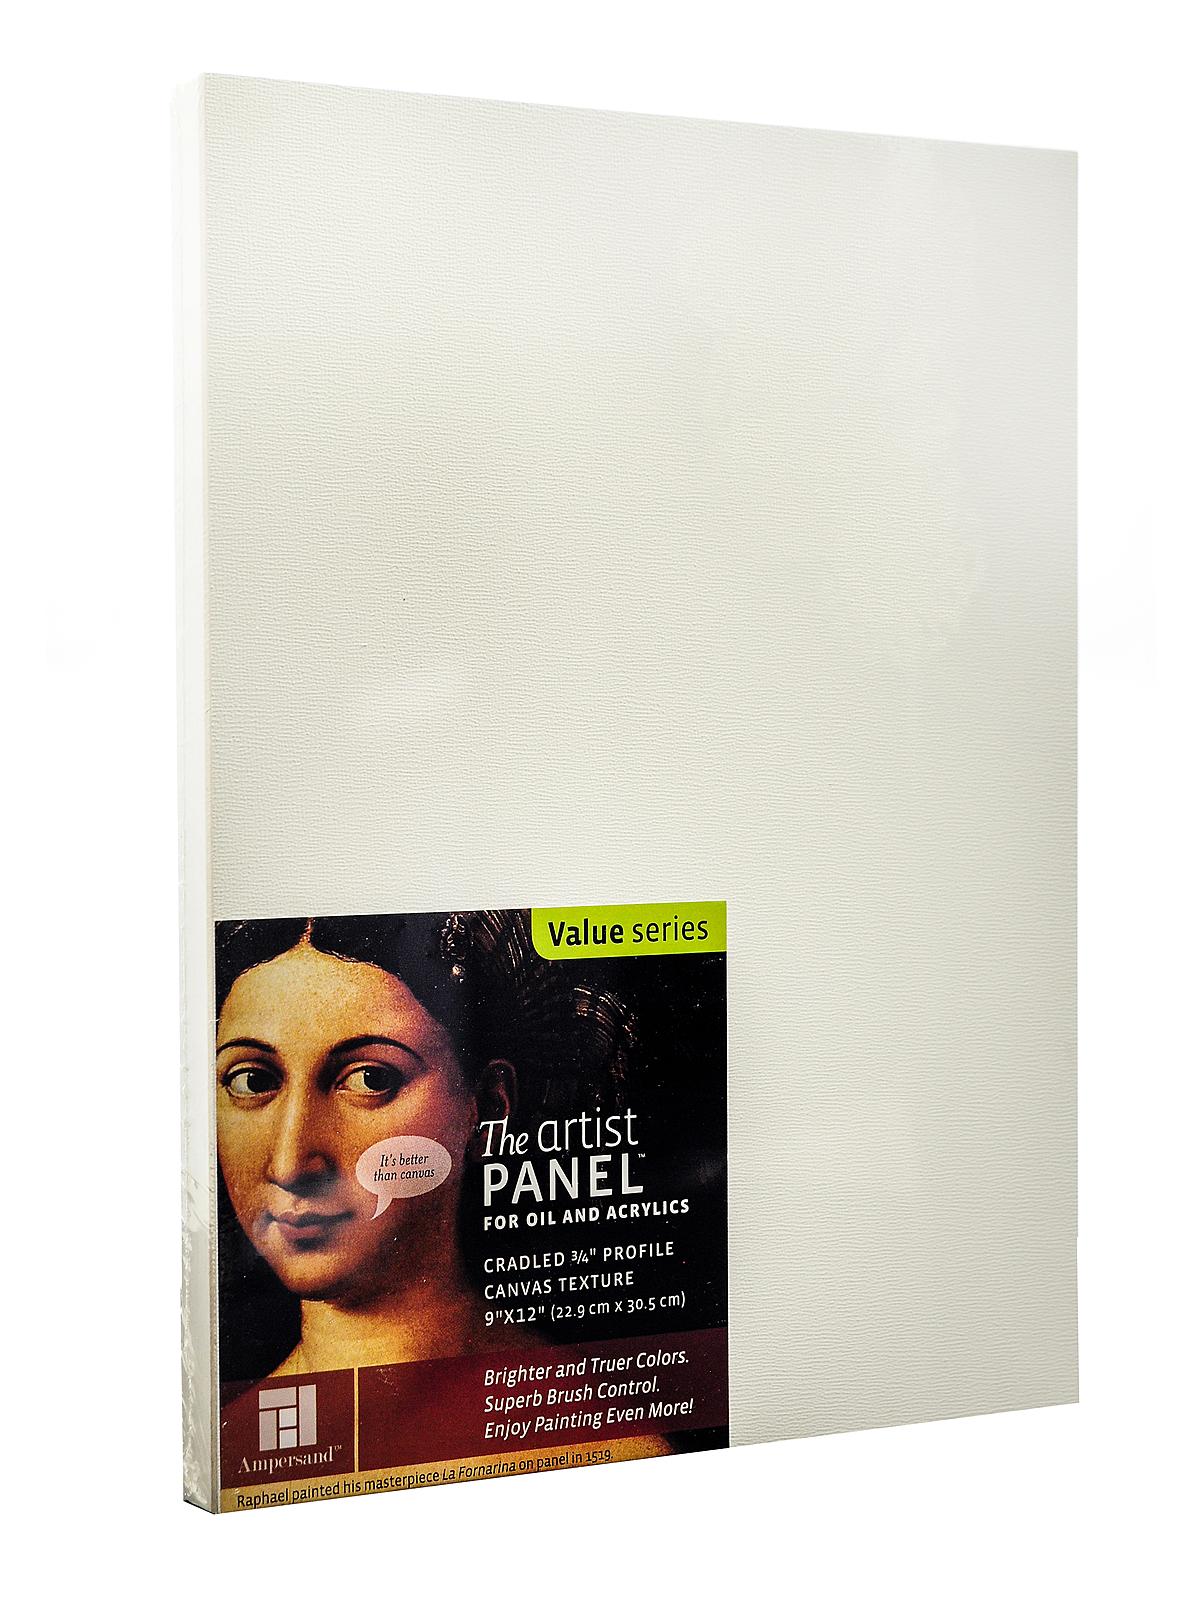 The Artist Panel Canvas Texture Cradled Profile 9 In. X 12 In. 3 4 In.